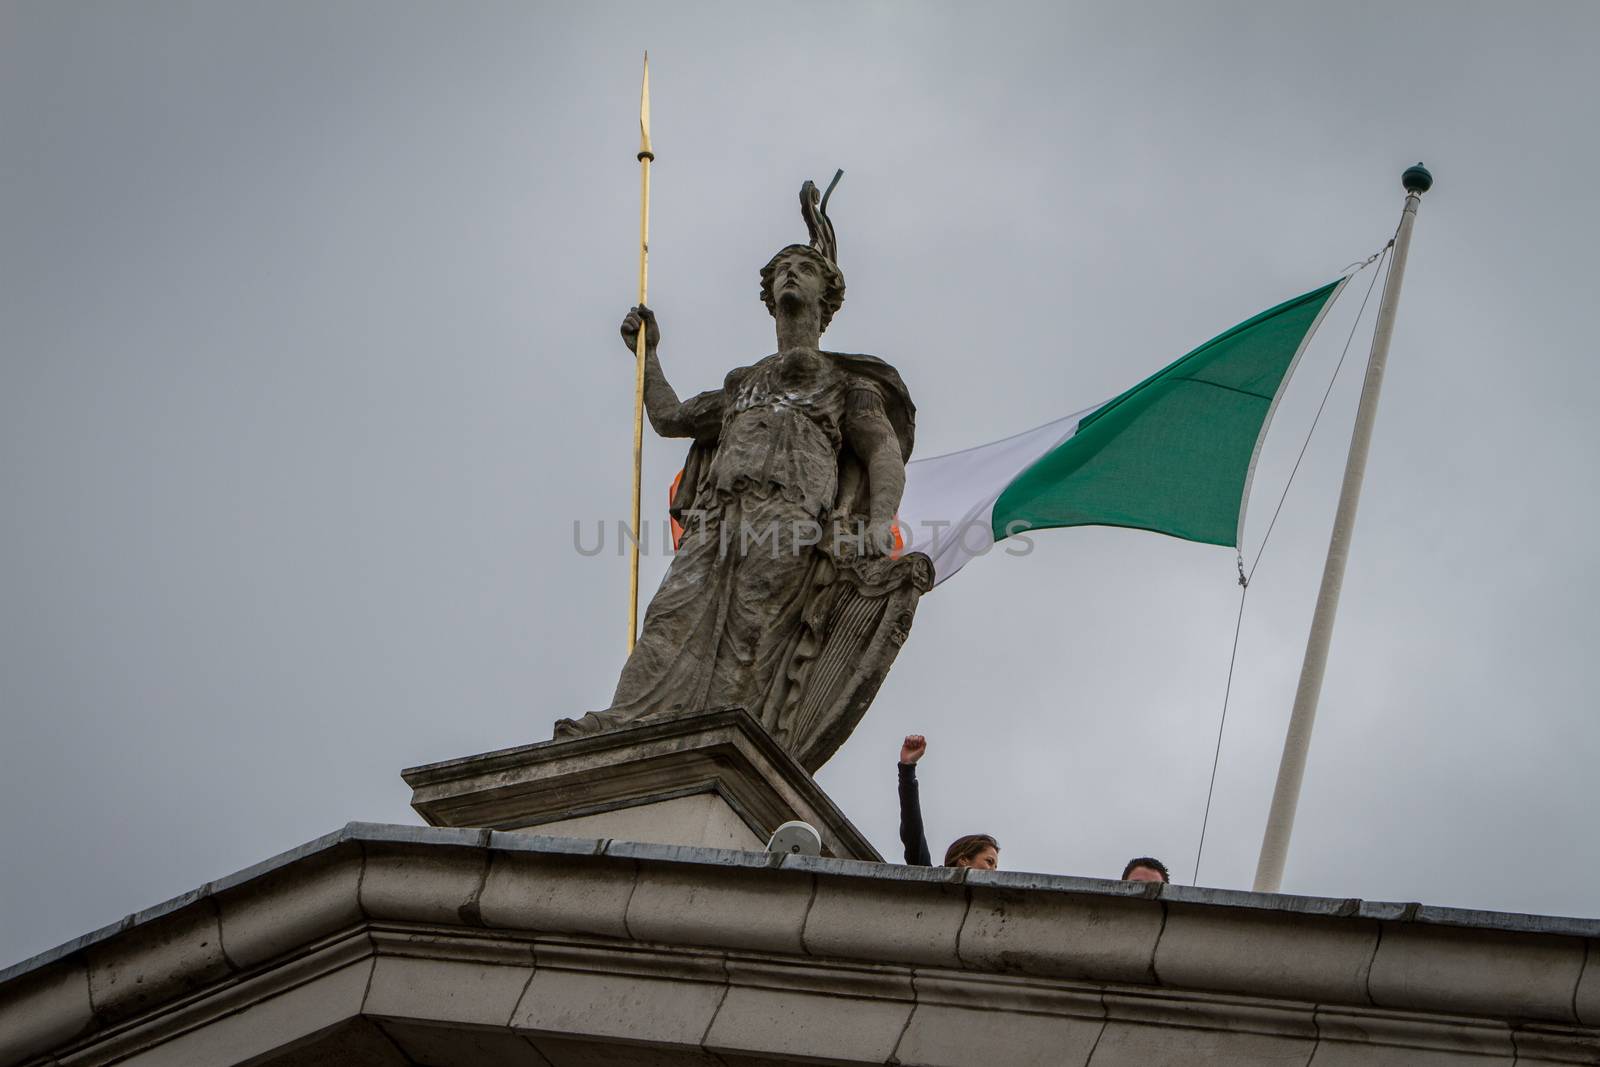 IRELAND, Dublin: A picture is taken of the Hibernia statue on the  General Post Office facade as thousands demonstrate to commemorate the 100 year anniversary of the 1916 Easter Rising in front of the GPO General Post Office in central Dublin on April 24, 2016. Irish people has the opportunity to host a proper ceremony on behalf of all citizens that will pay proper tribute to the men and women of 1916 and to the Proclamation of the Irish Republic Thousand of people celebrate the big day in Ireland.